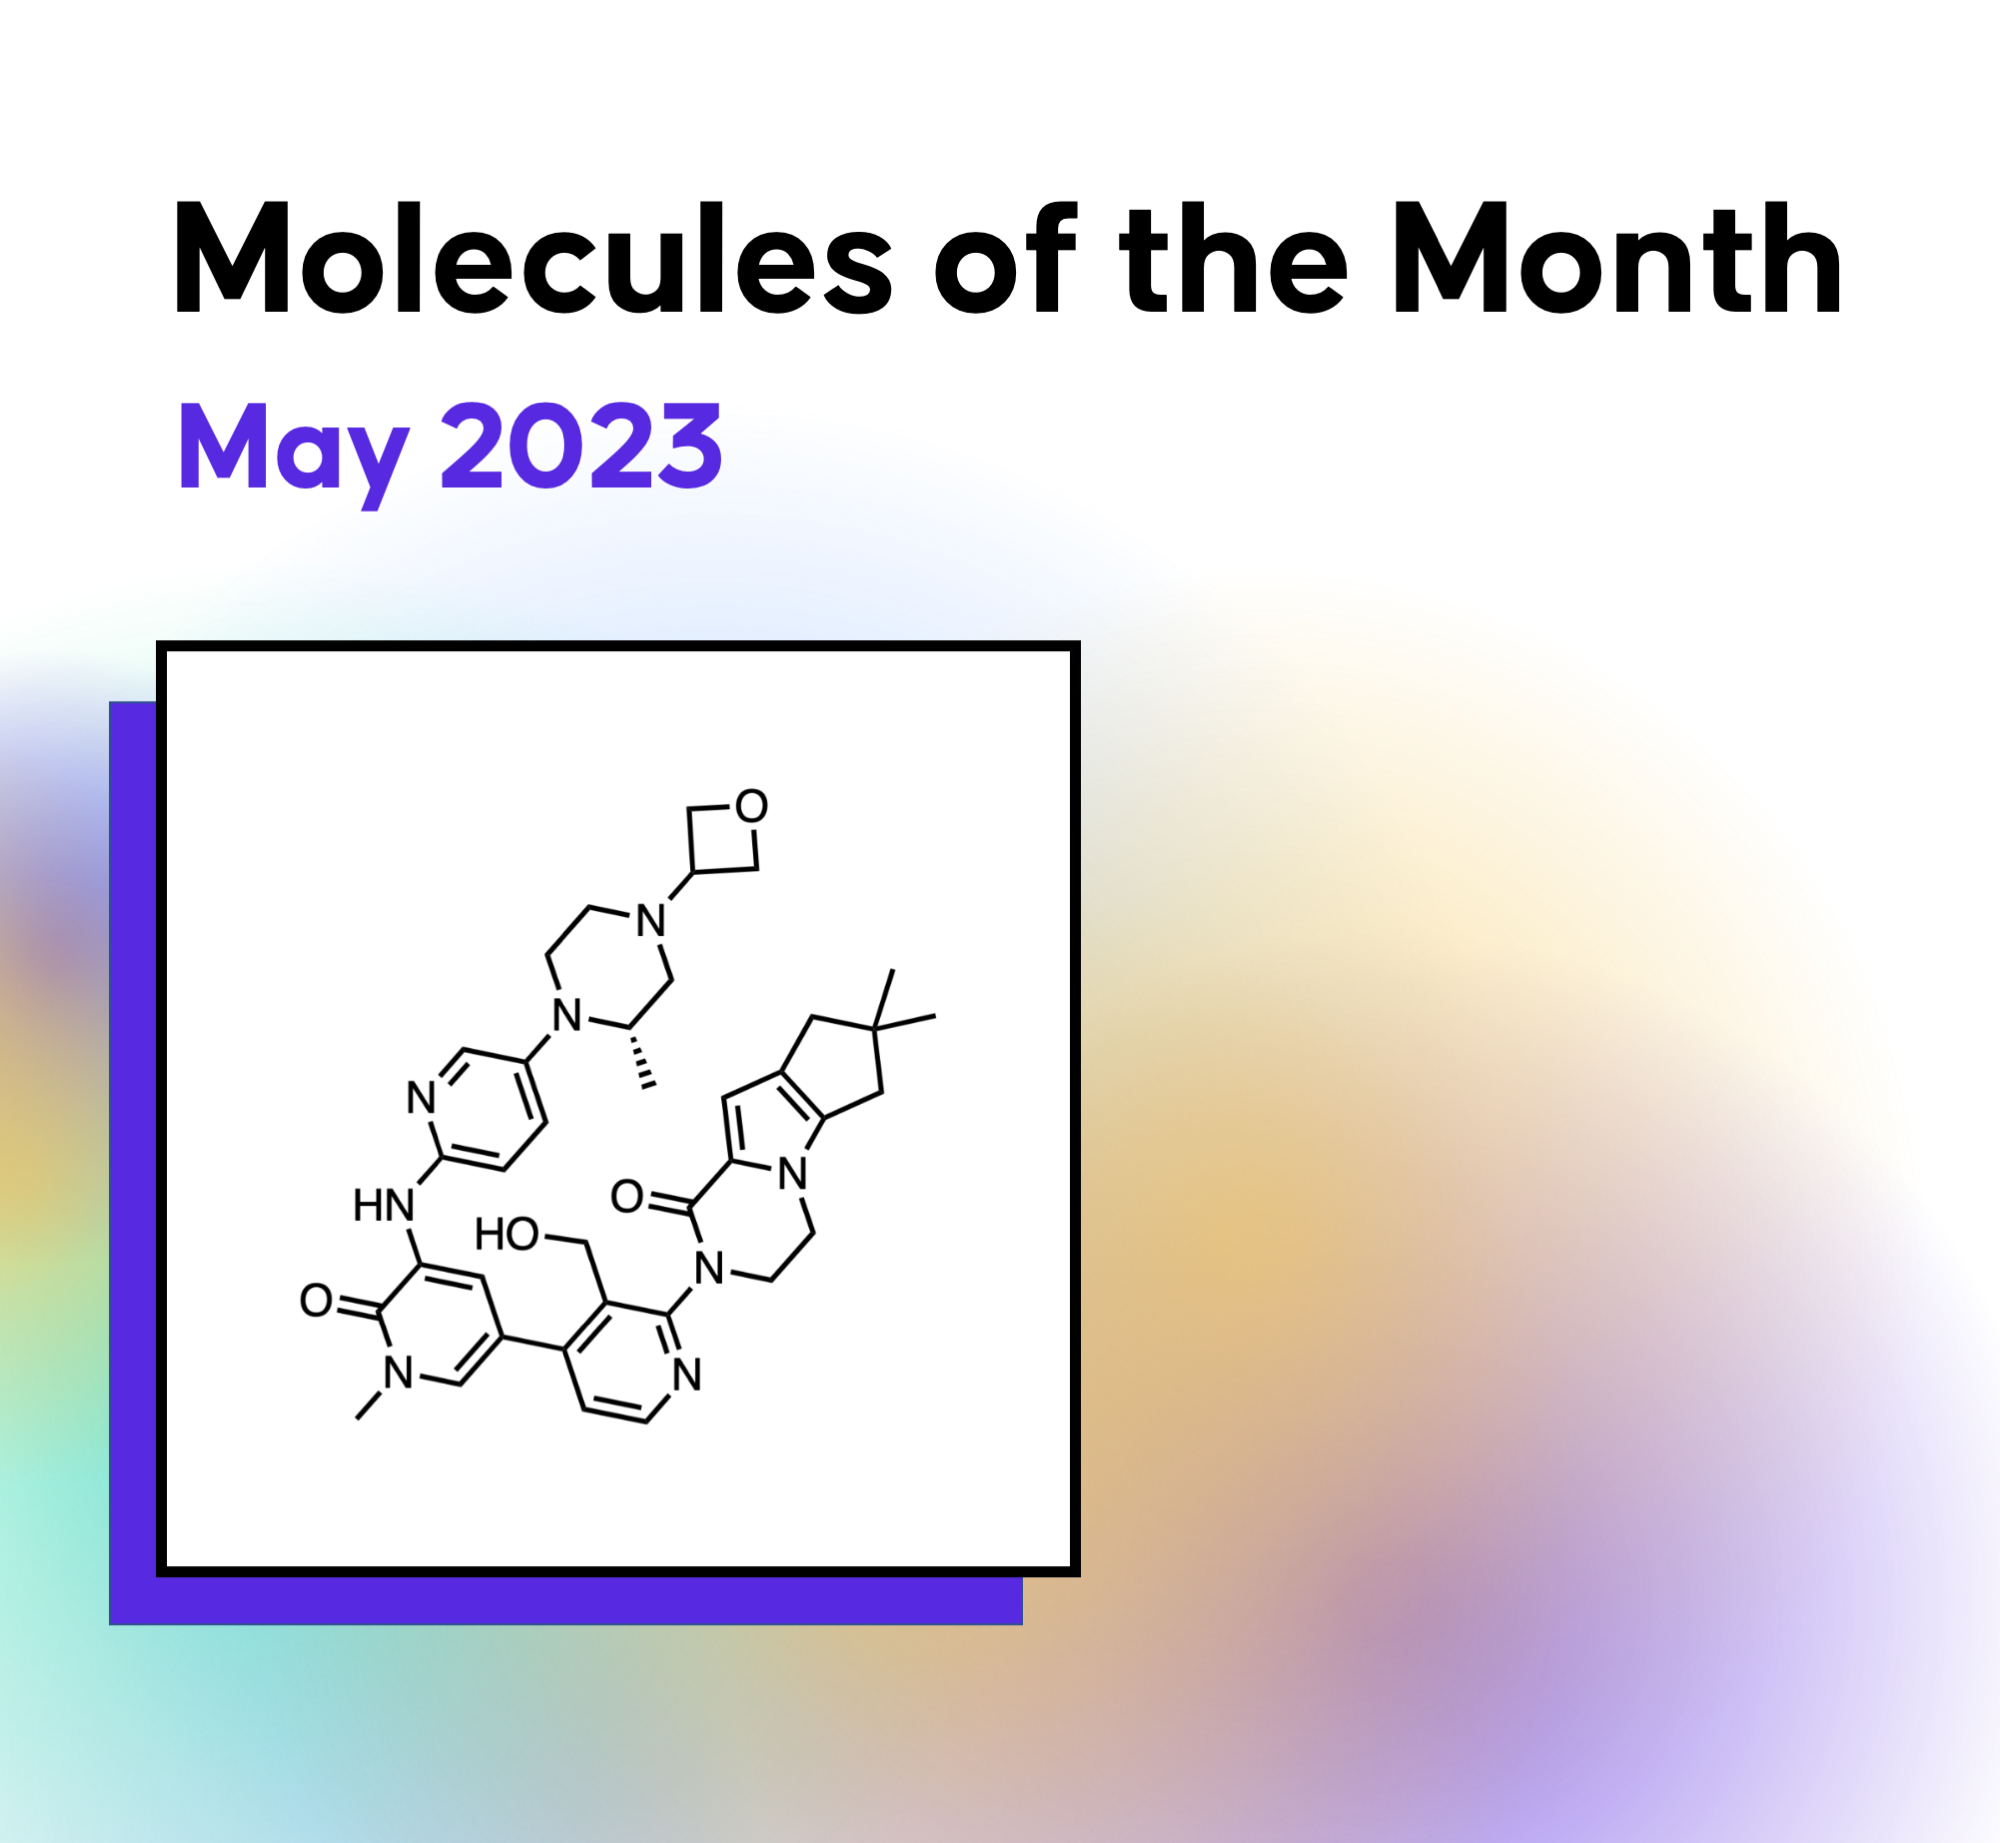 small molecules of the month, may 2023, fenebrutinib